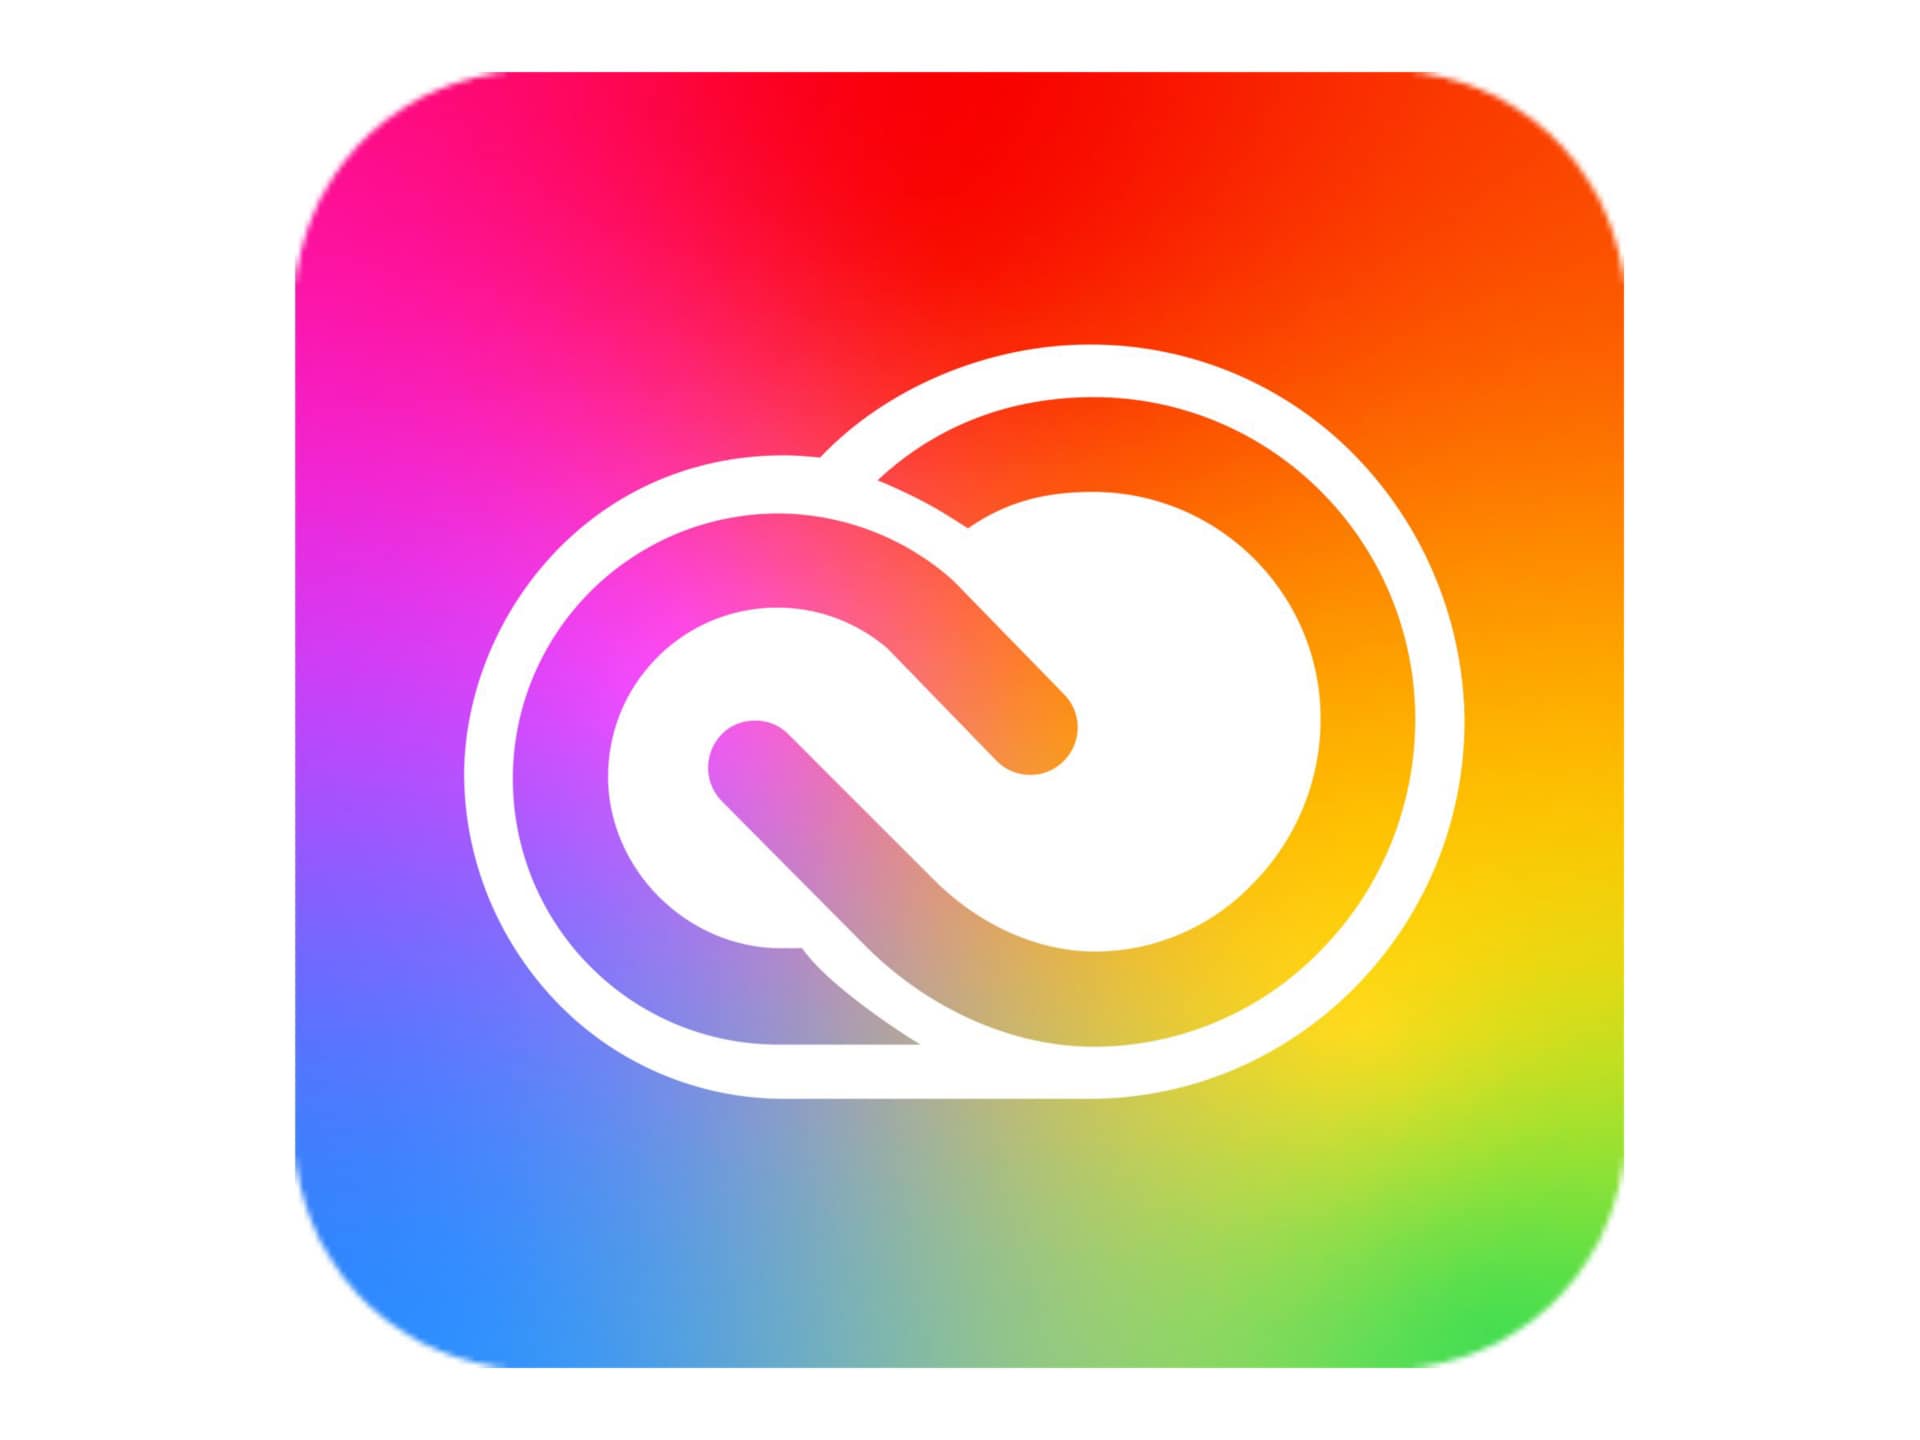 Adobe Creative Cloud for teams - Subscription New (5 months) - 10 assets, 1 named user - with Adobe Stock